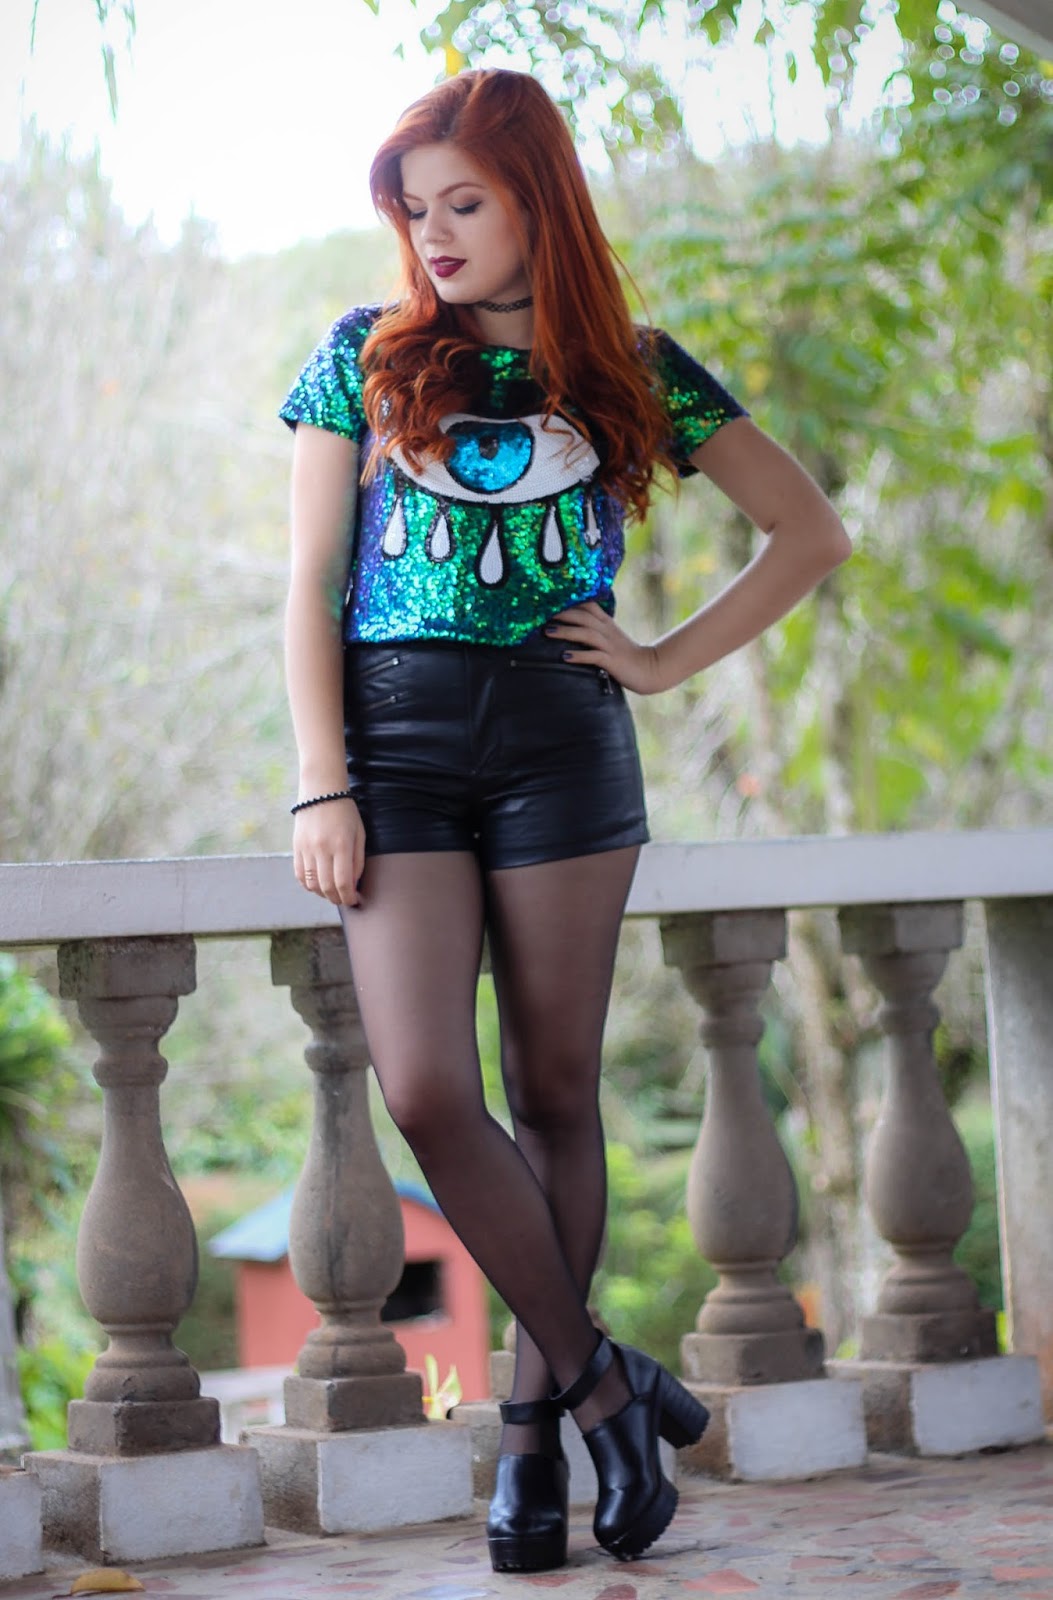 fashioninfected.com - Fashionmylegs : The tights and hosiery blog